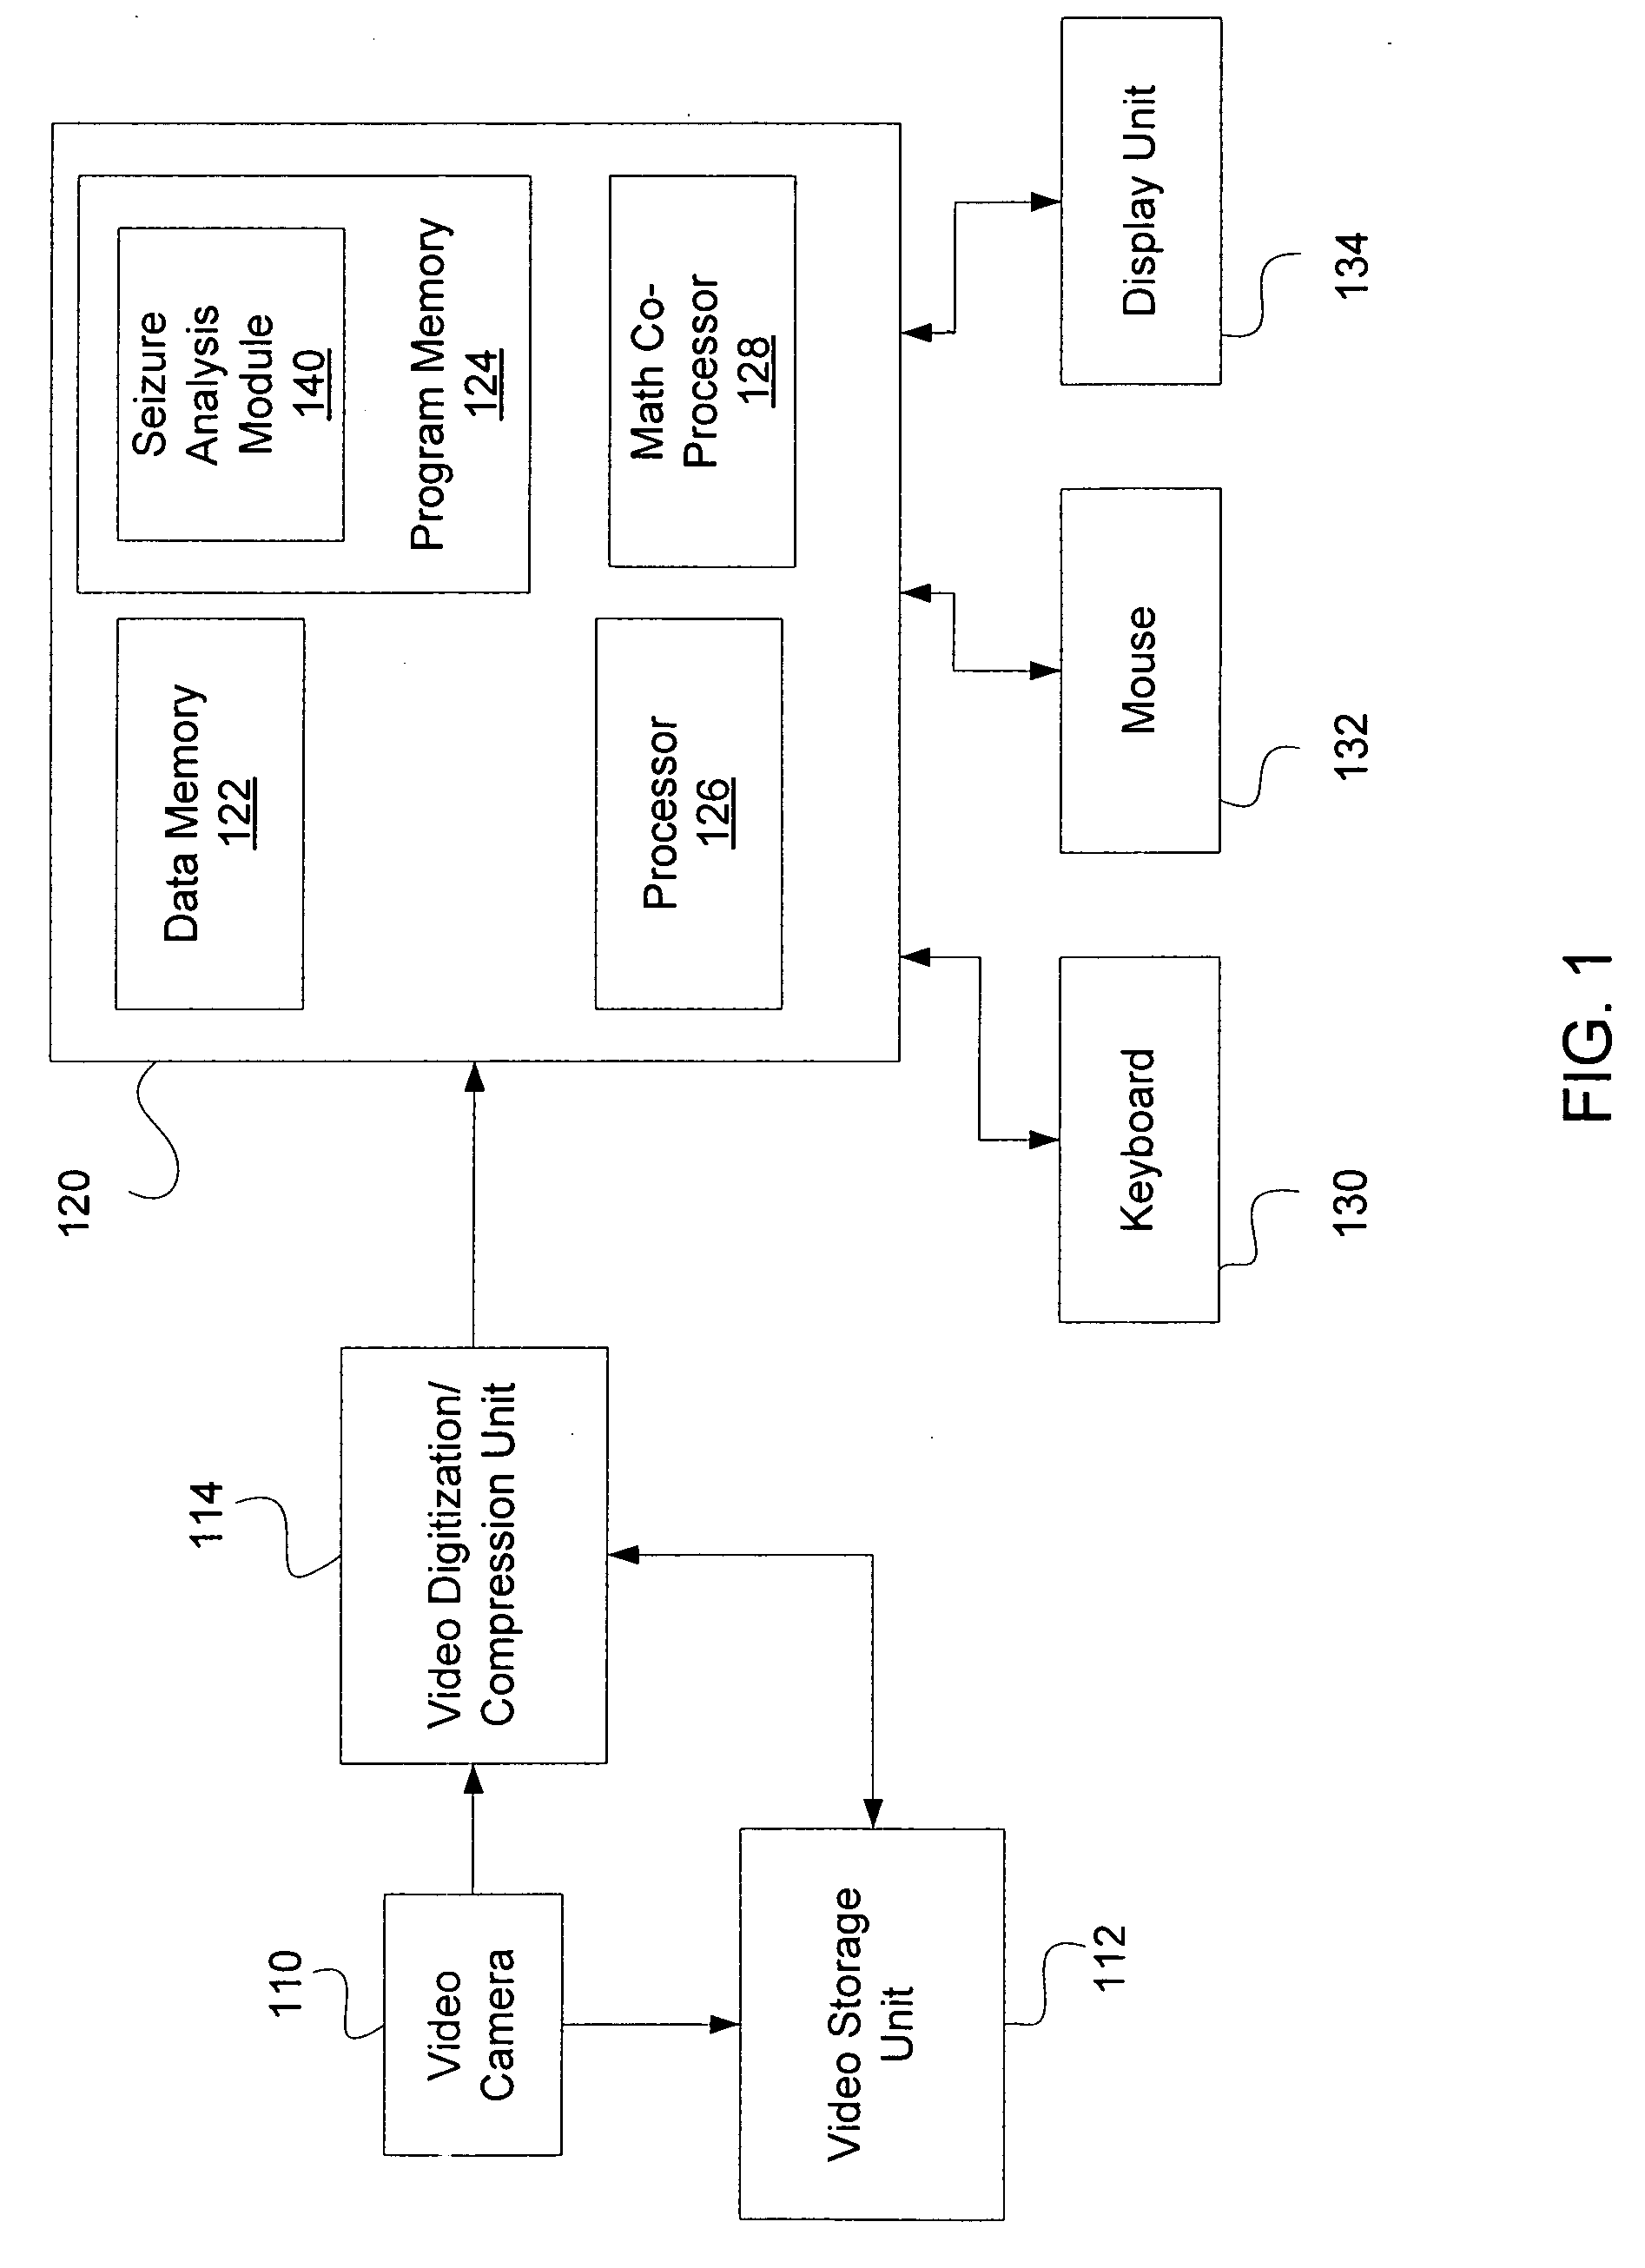 System and method for animal seizure detection and classification using video analysis